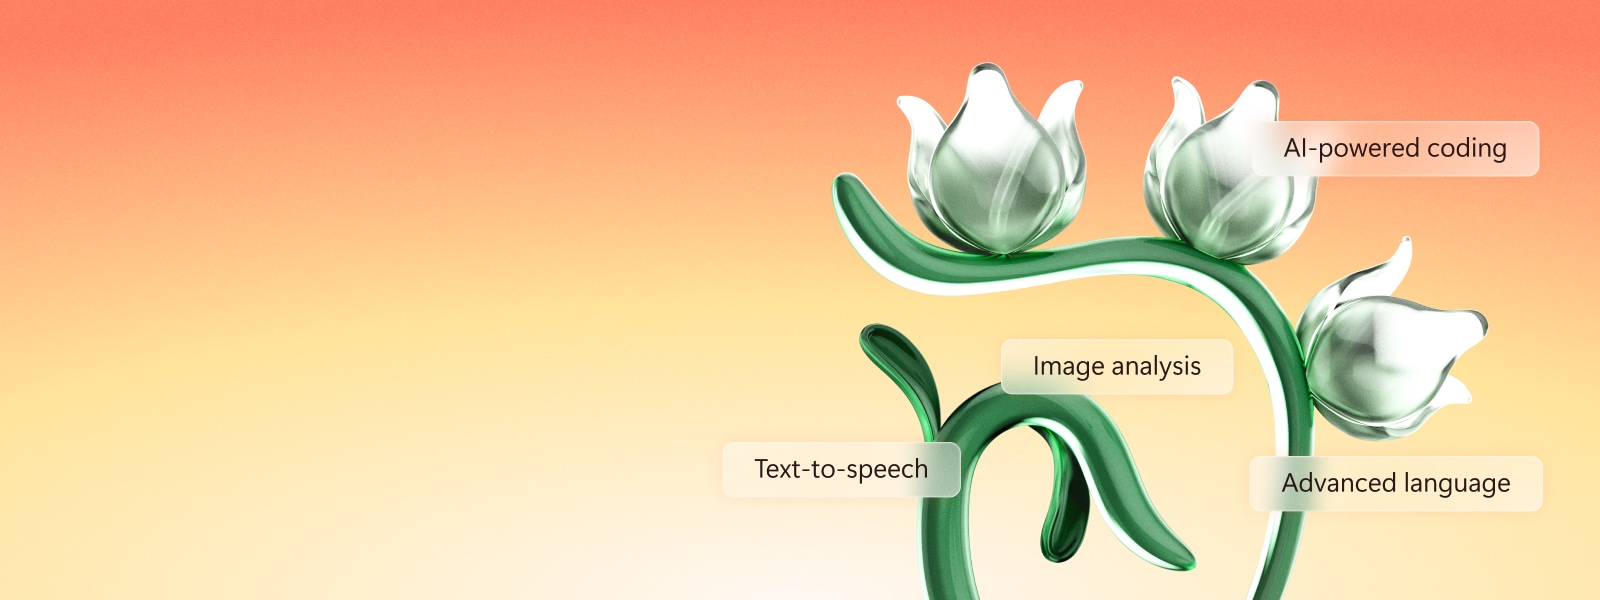 Orange gradient background with computer generated flower and phrases on branches and petals, clockwise from bottom, Text-to-speech, Image analysis, AI-powered coding, Advanced language